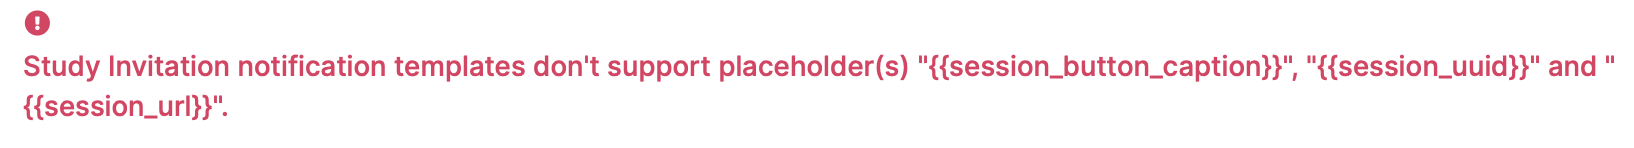 Error message for not supported placeholders